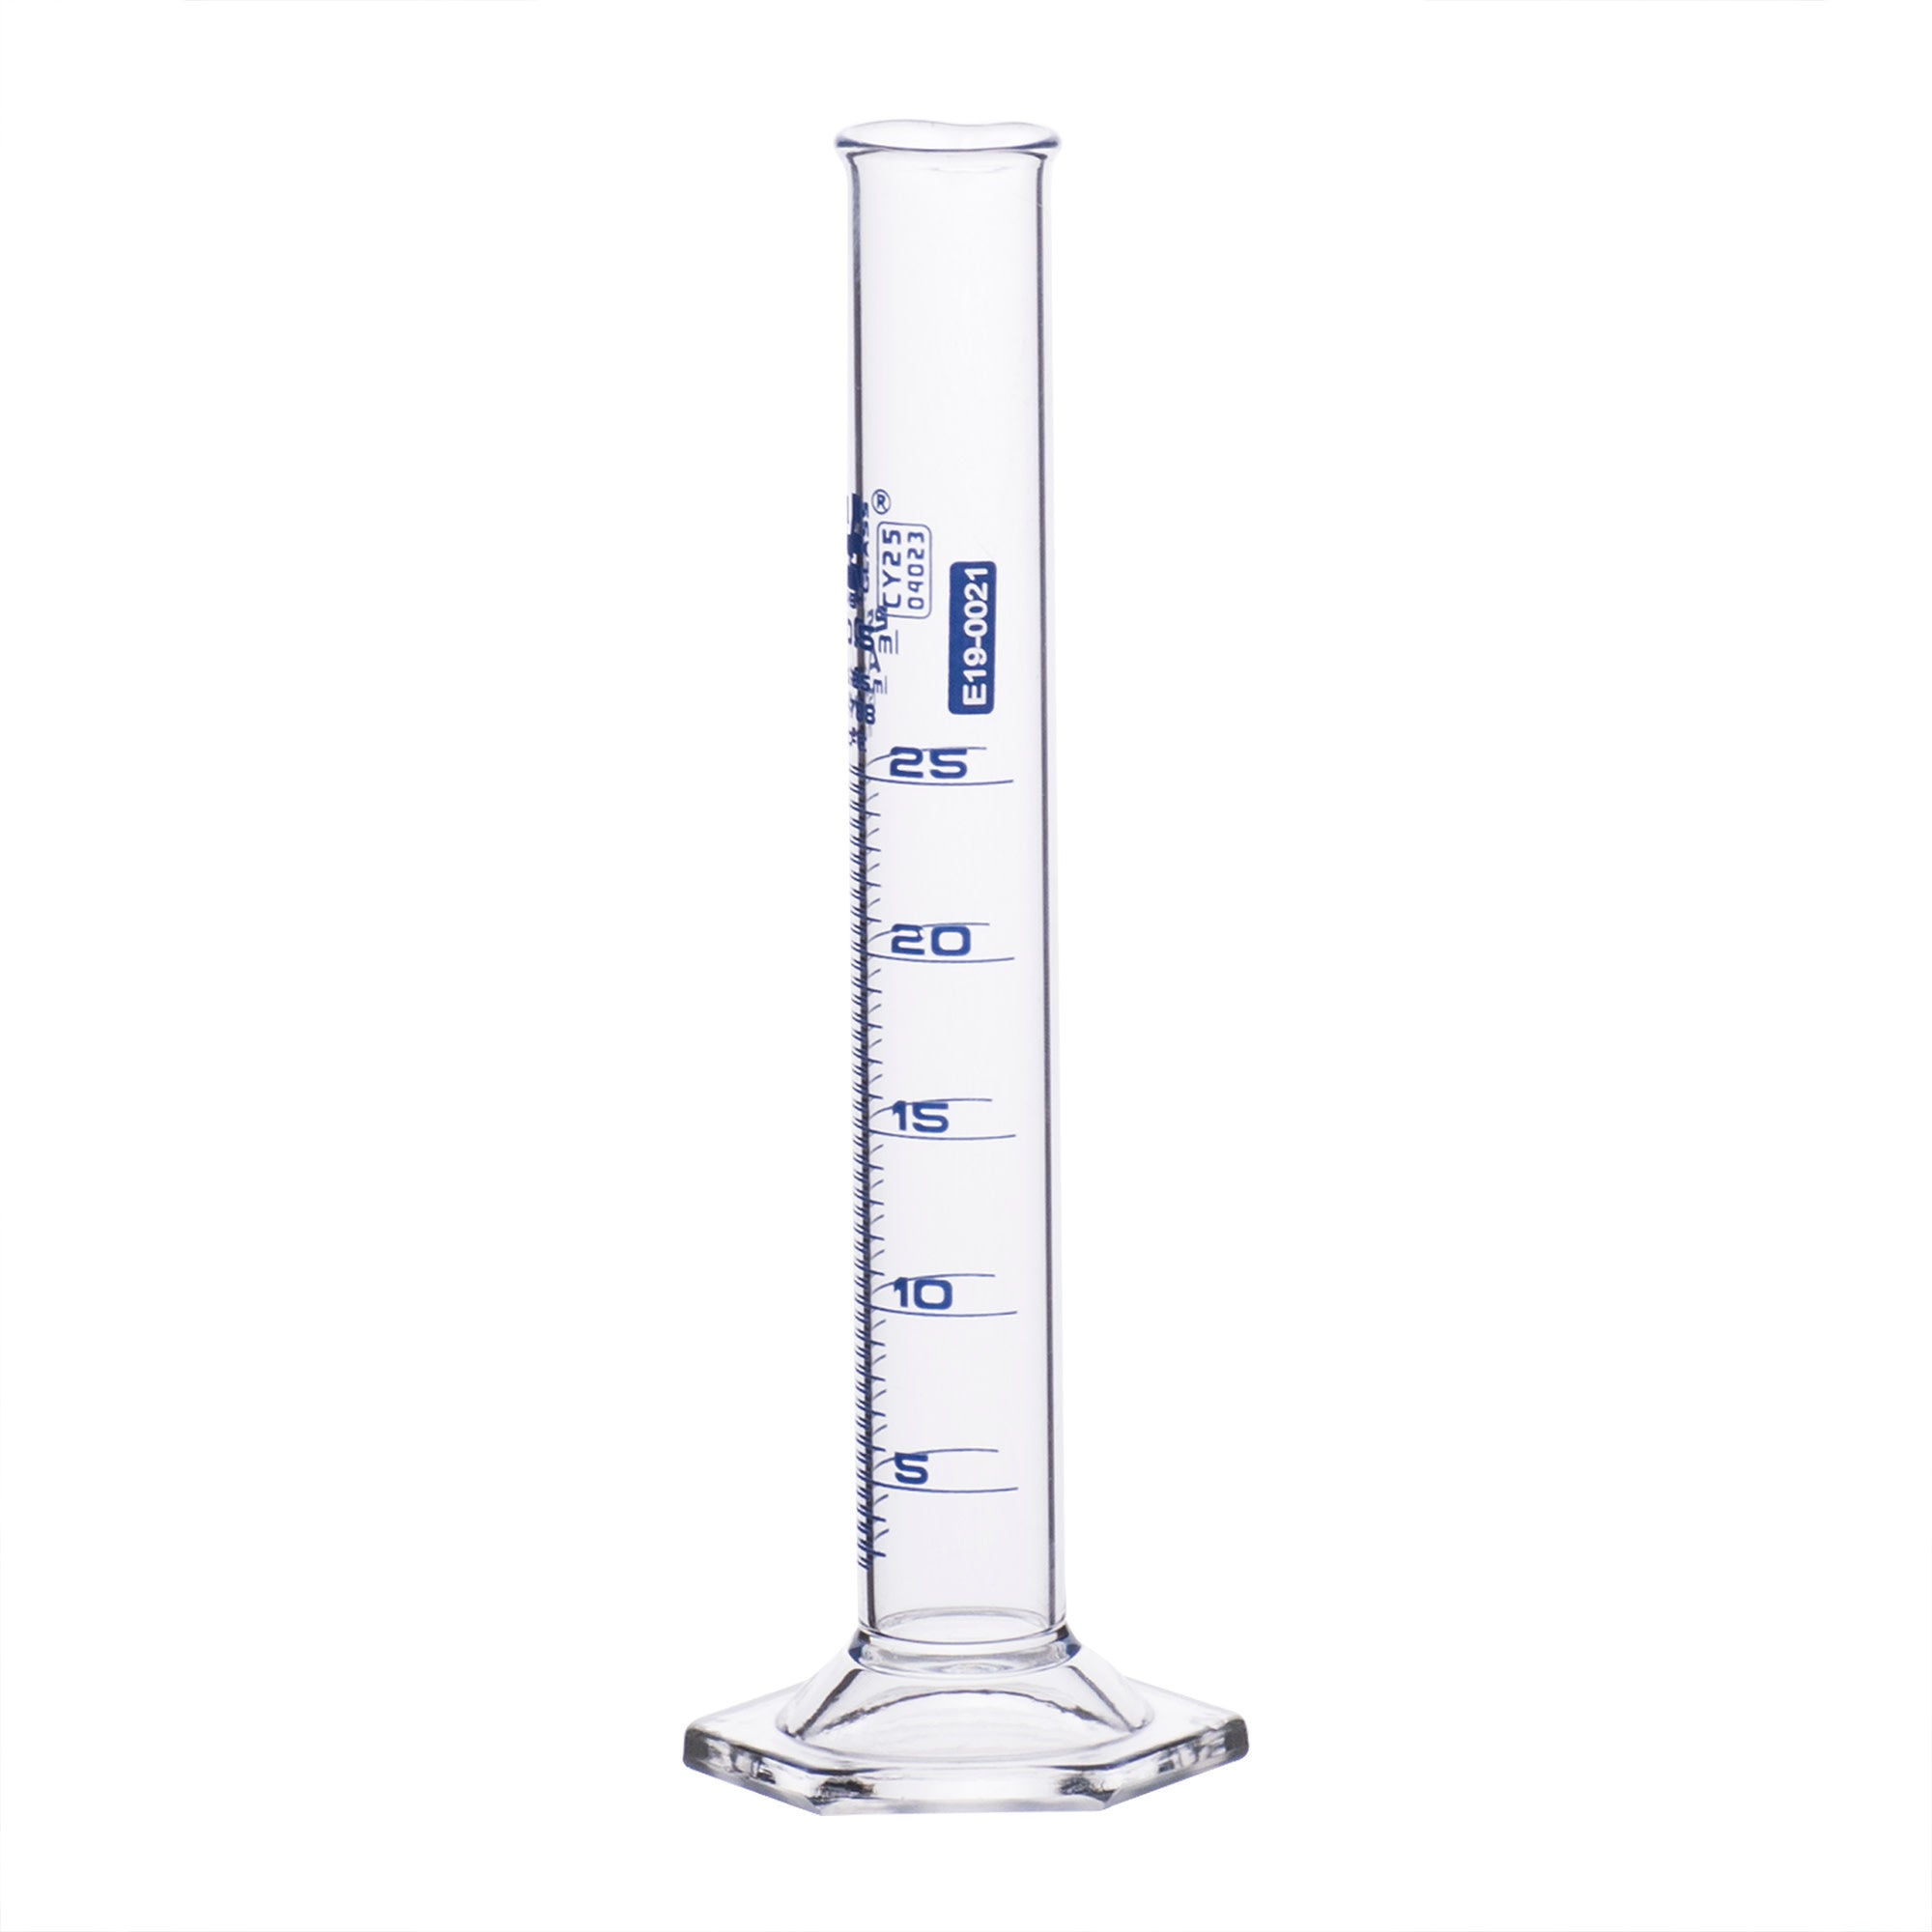 Borosilicate Glass Graduated Cylinder with Hexagonal Base, 25 ml, Class A with Individual Work Certificate